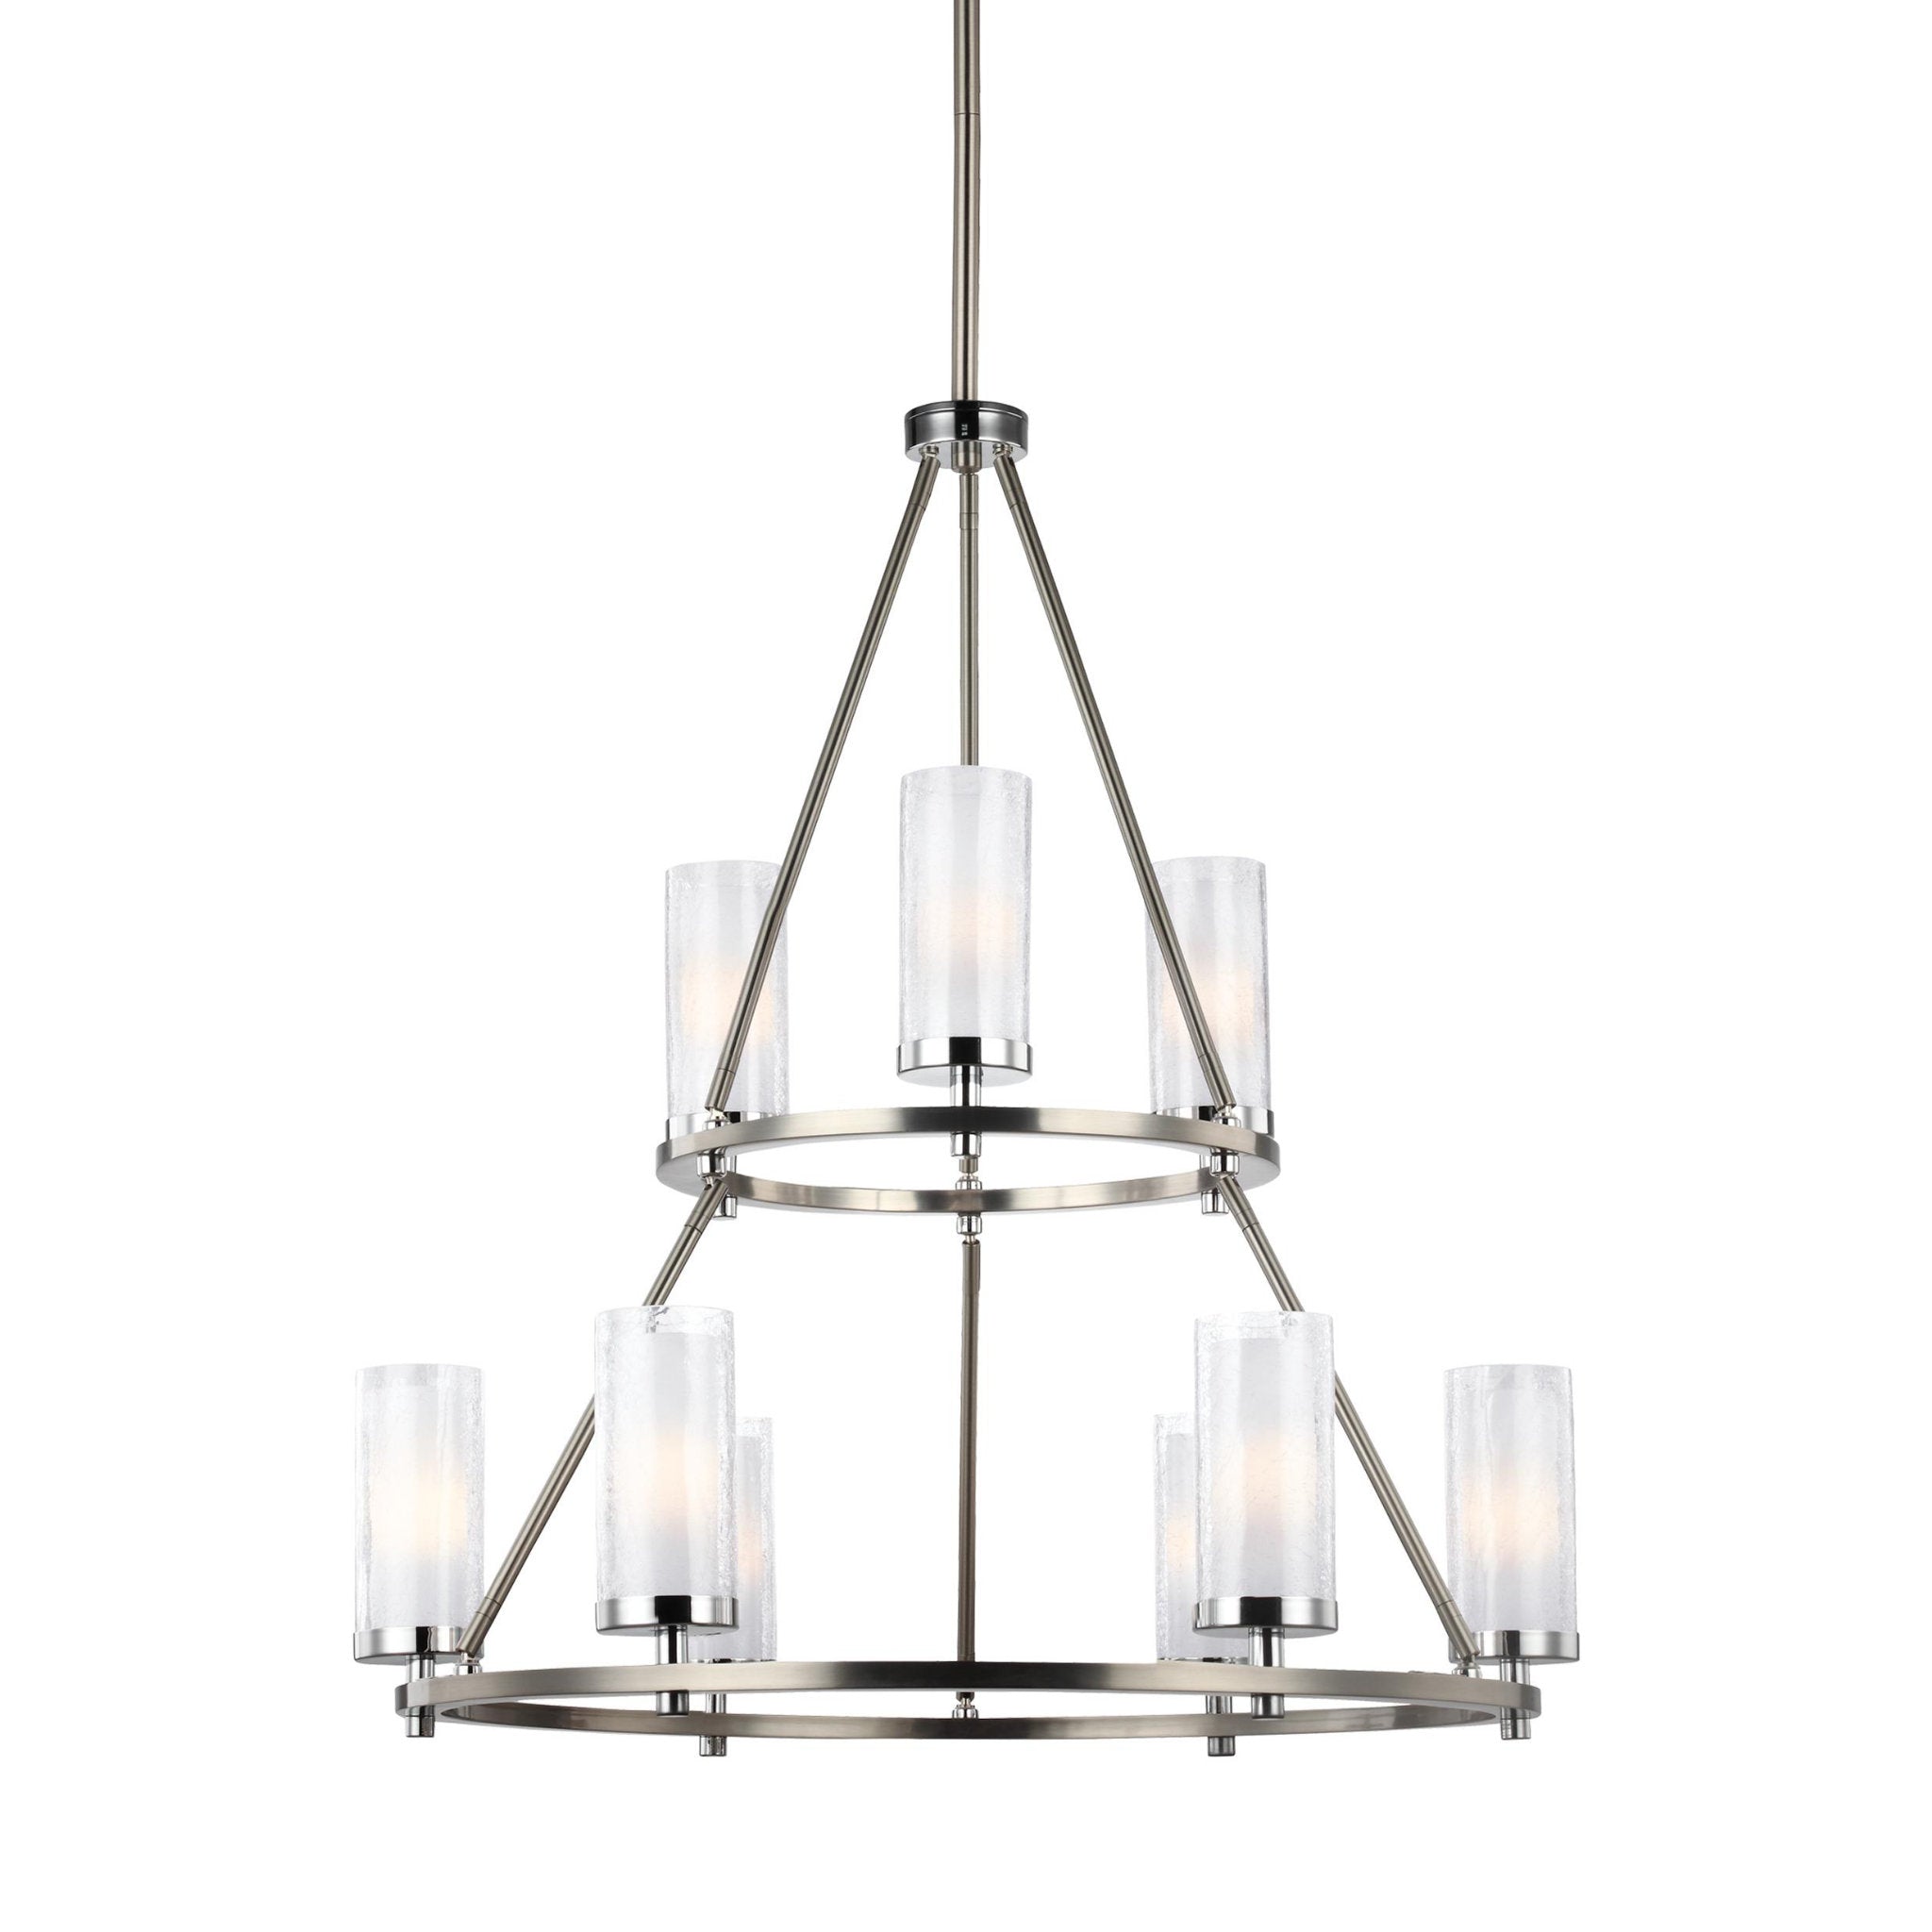 Jonah Two-Tier Chandelier Period Uptown 33.5" Height Steel Round White Opal Etched Shade in Satin Nickel / Chrome